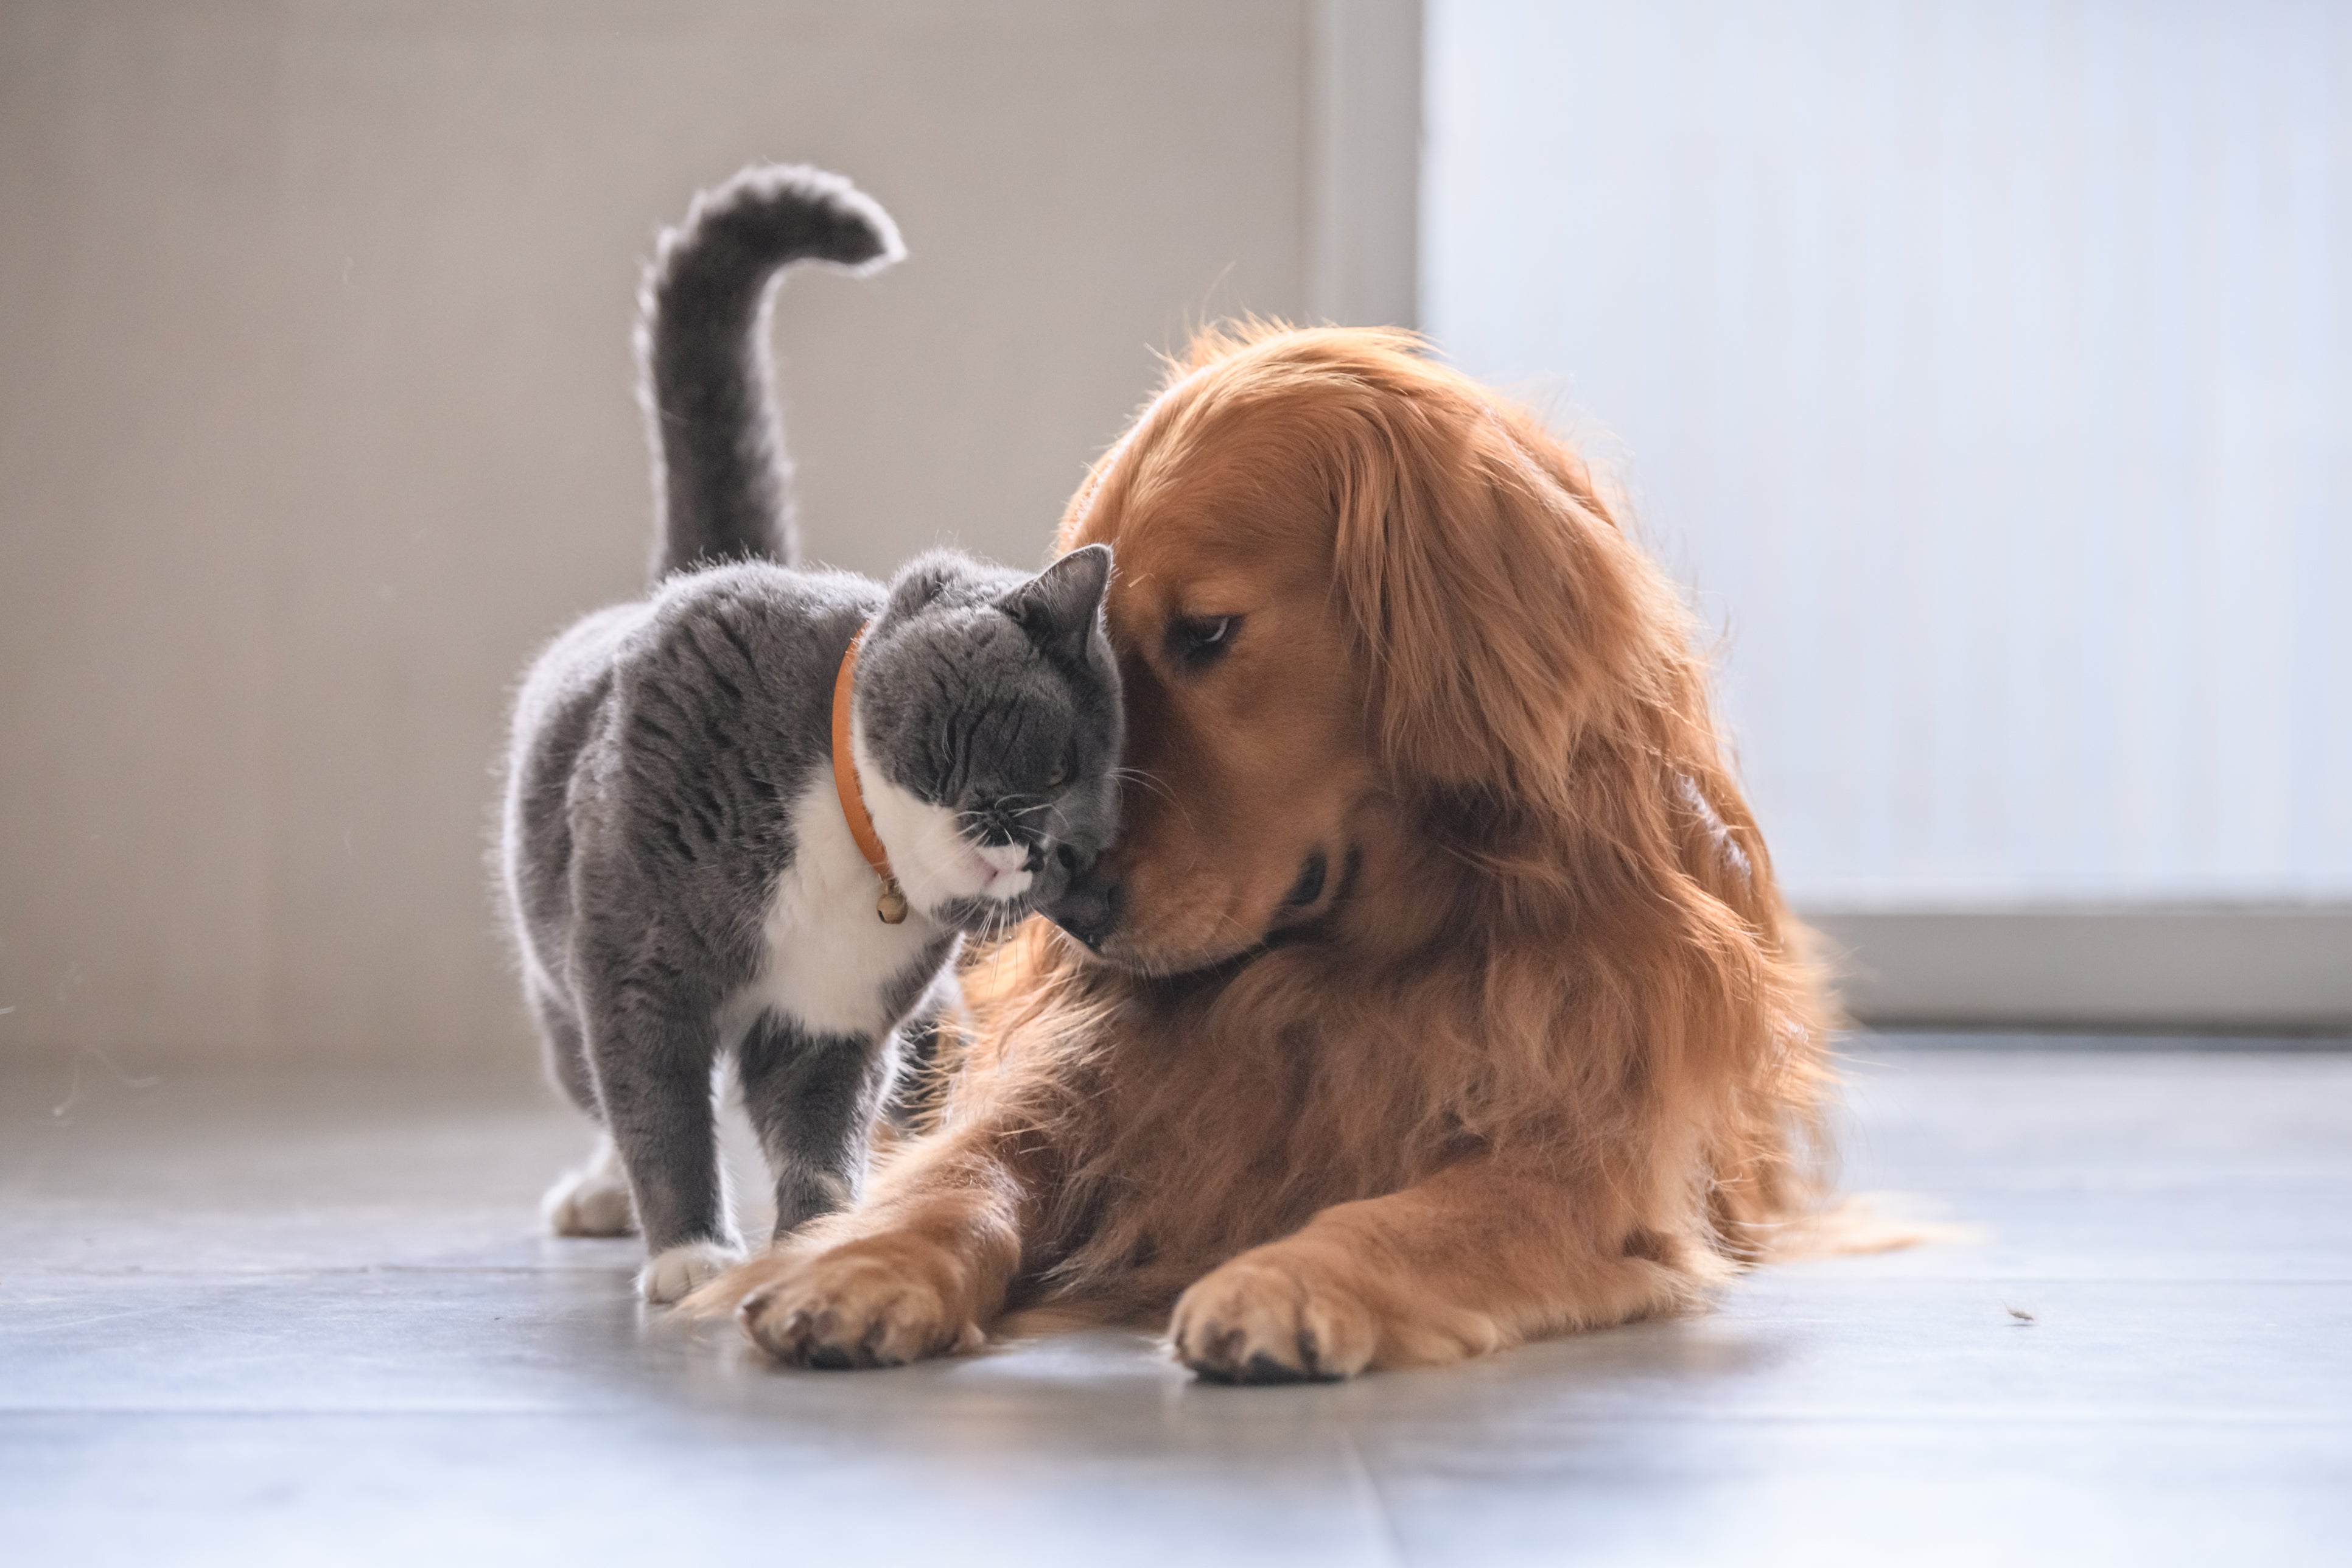 A ‘substantial proportion’ of pet cats and dogs may catch Covid-19 from their owners, a new study suggests